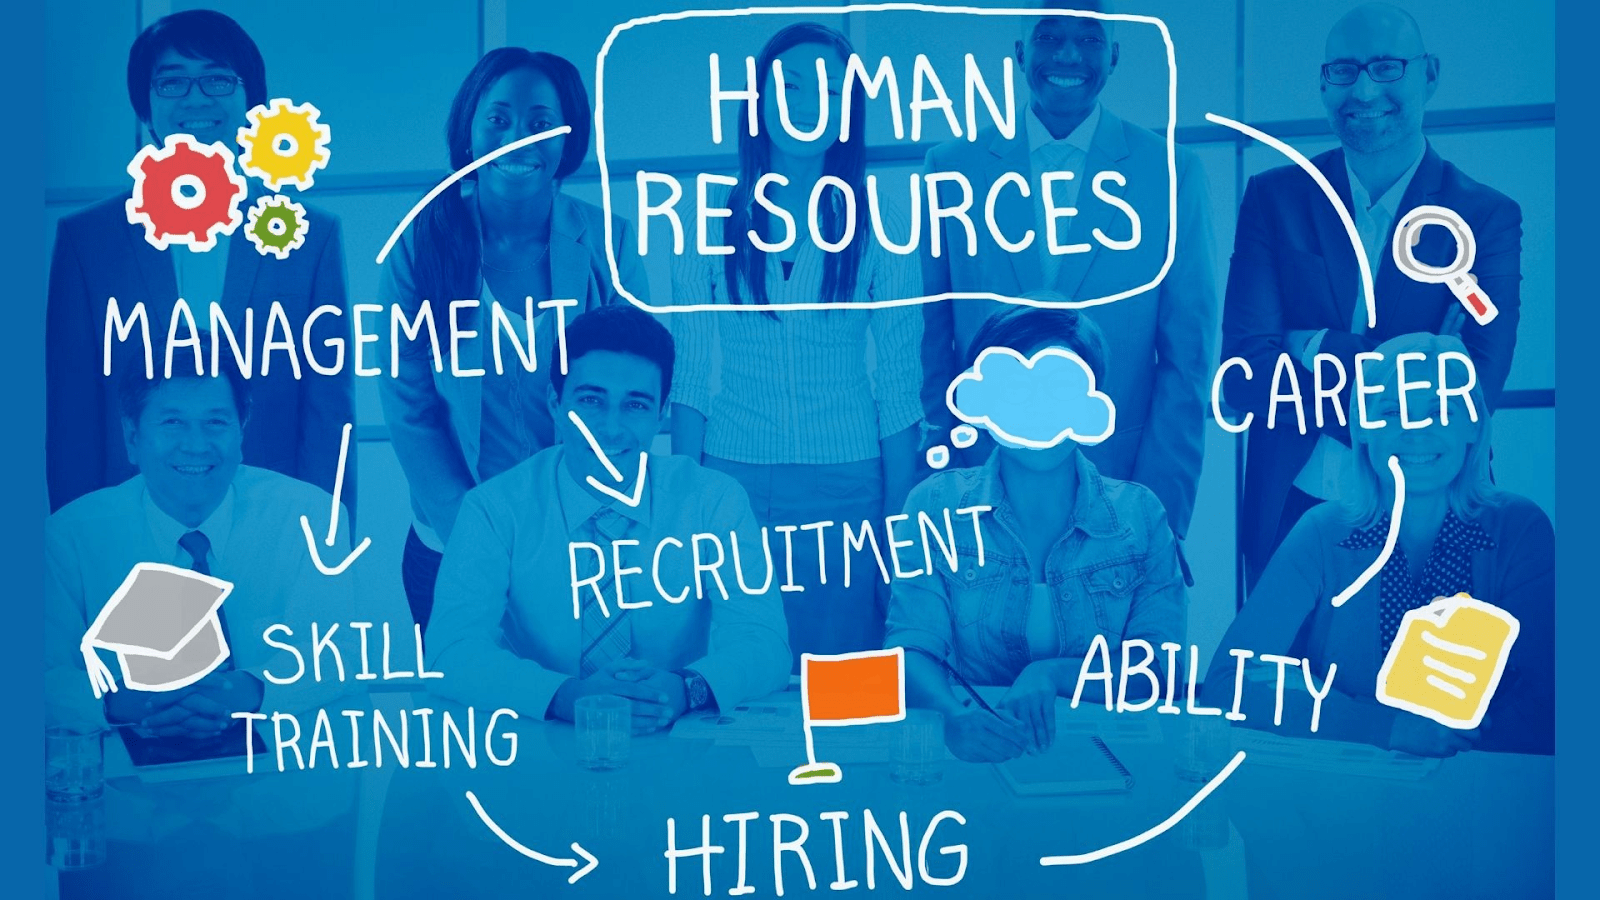 Examples of how to use human resource management system correctly